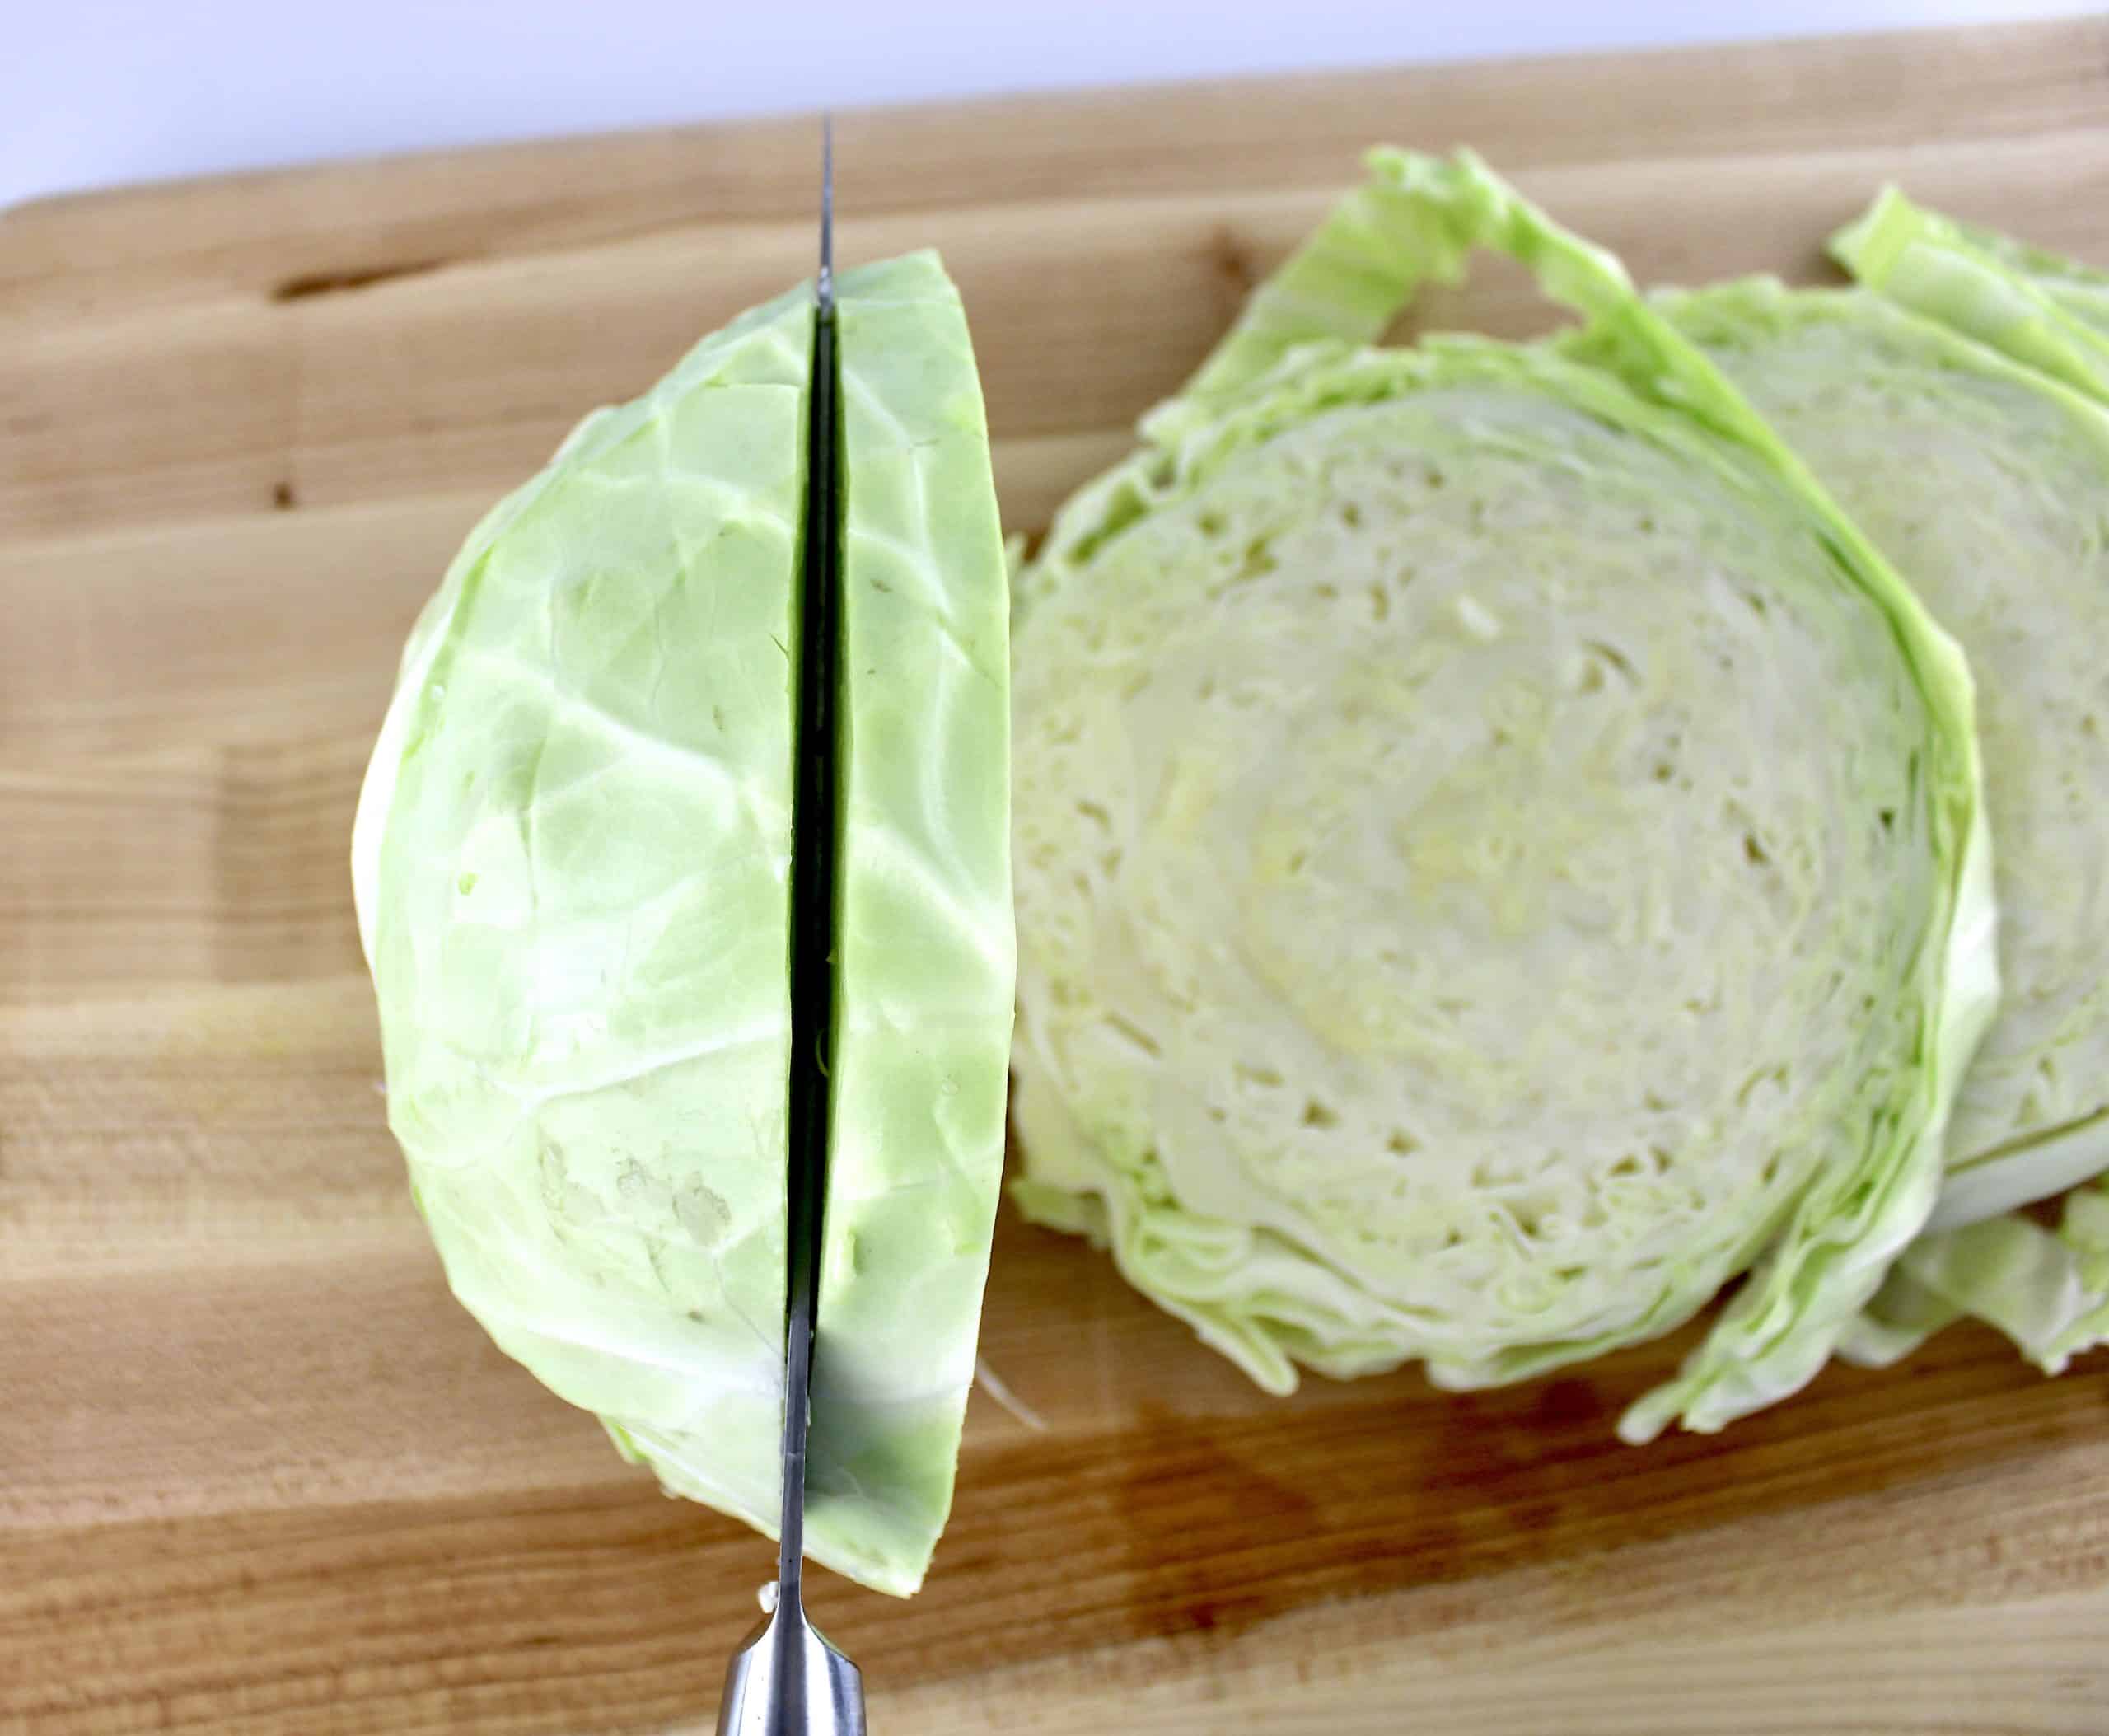 knife cutting a head of cabbage on cutting board